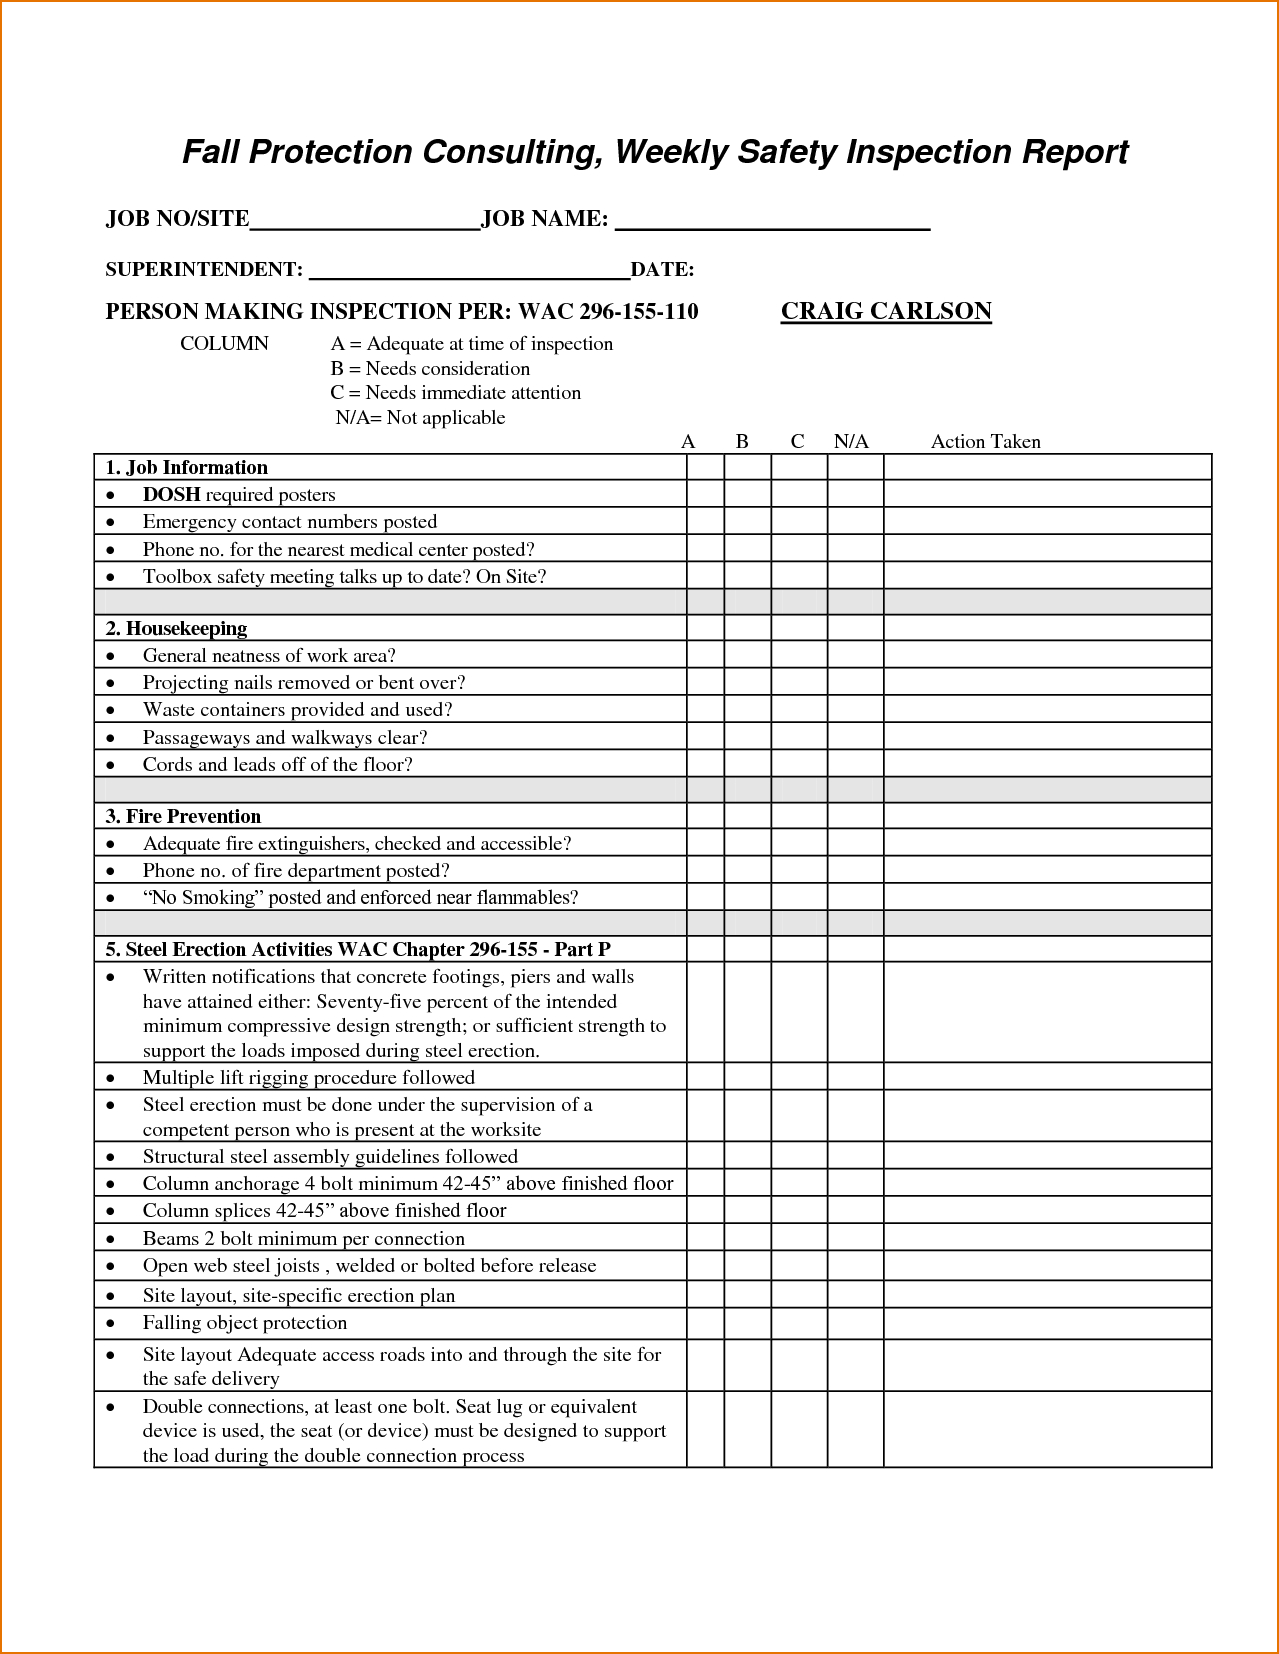 Home Inspection Report Template Pdf | Tagua Intended For Home Inspection Report Template Pdf